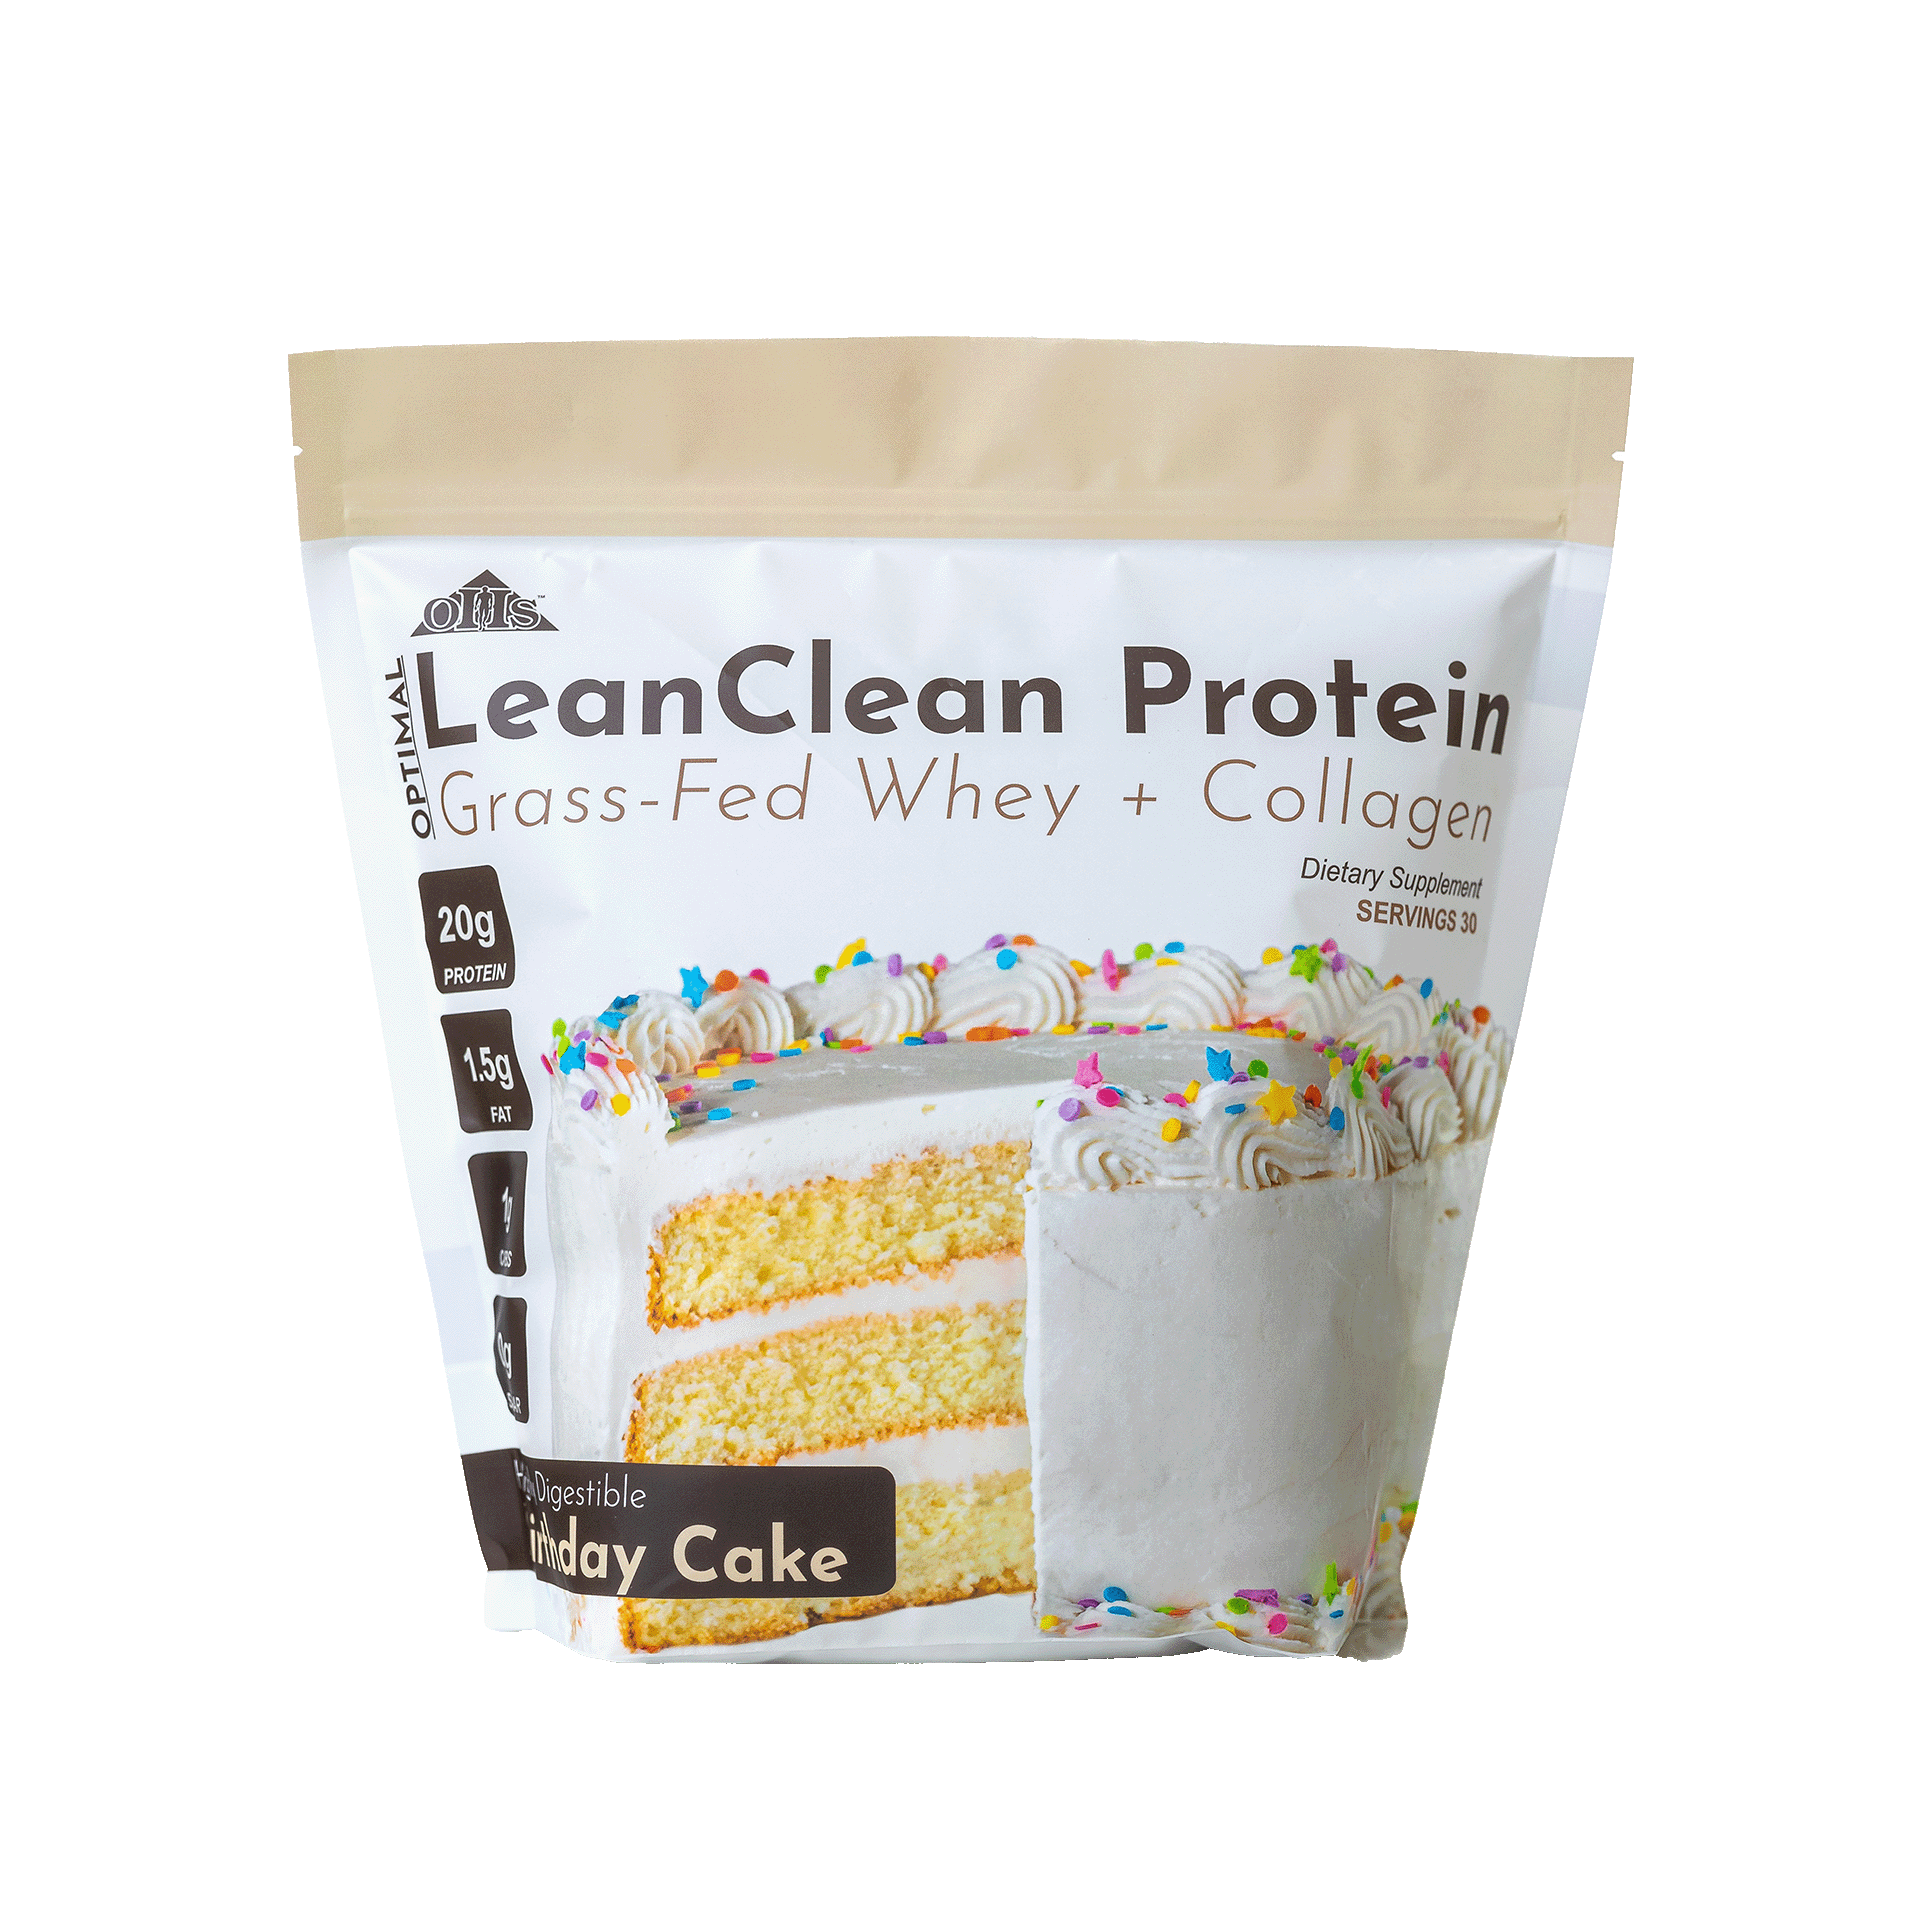 Image of a bag of Optimal LeanClean Protein Grass-Fed Whey + Collagen.